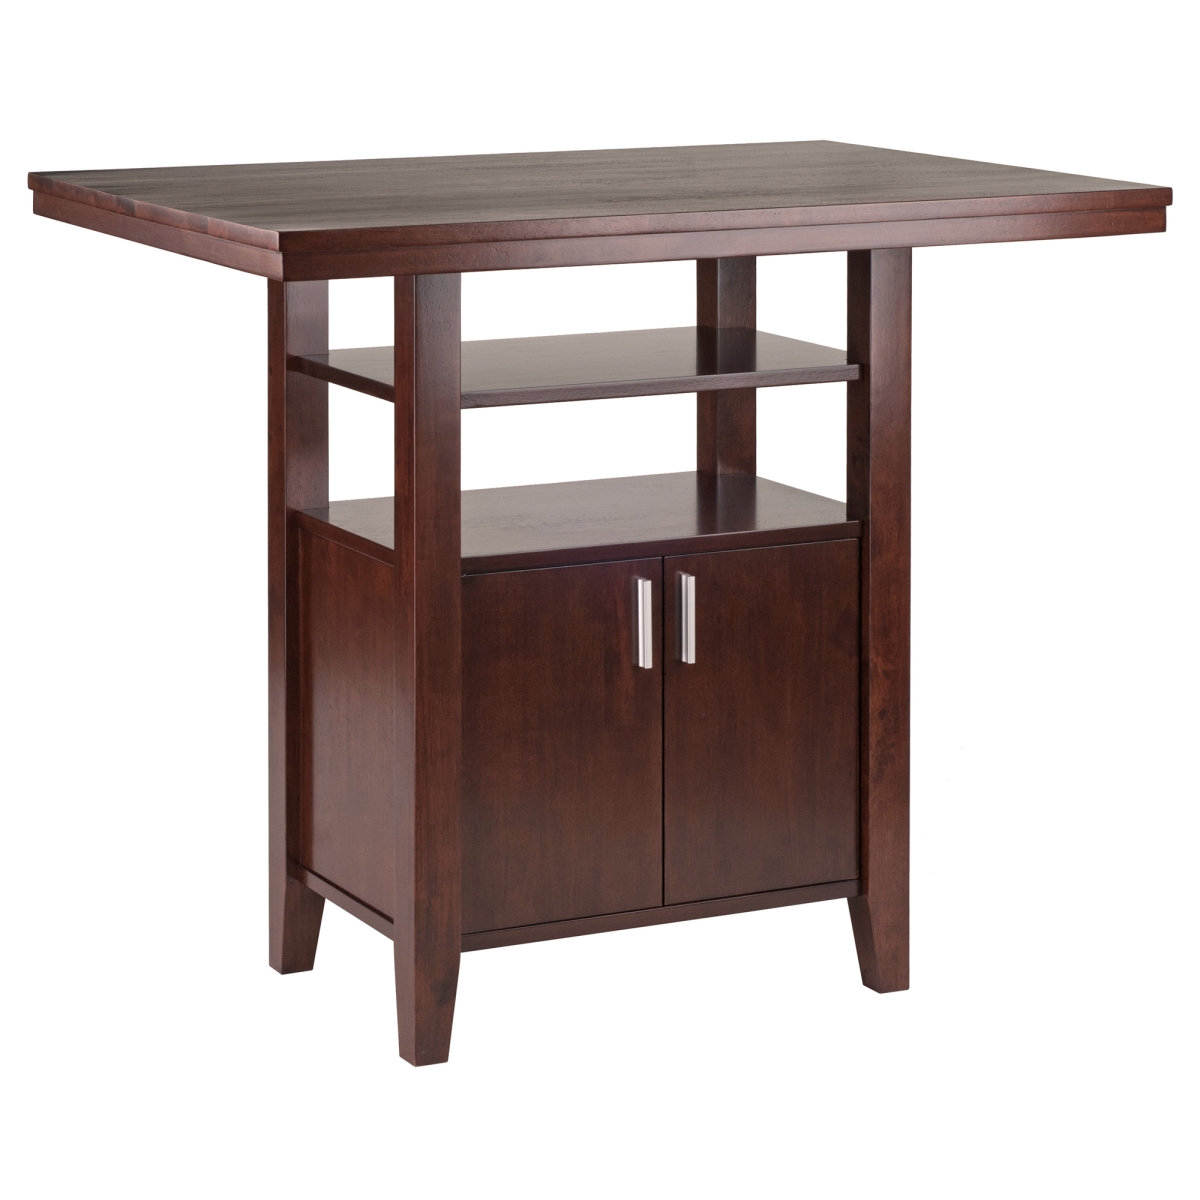 94042 Albany High Table With Cabinet & Shelf, Walnut - 41.7 X 29.9 X 35.8 In.